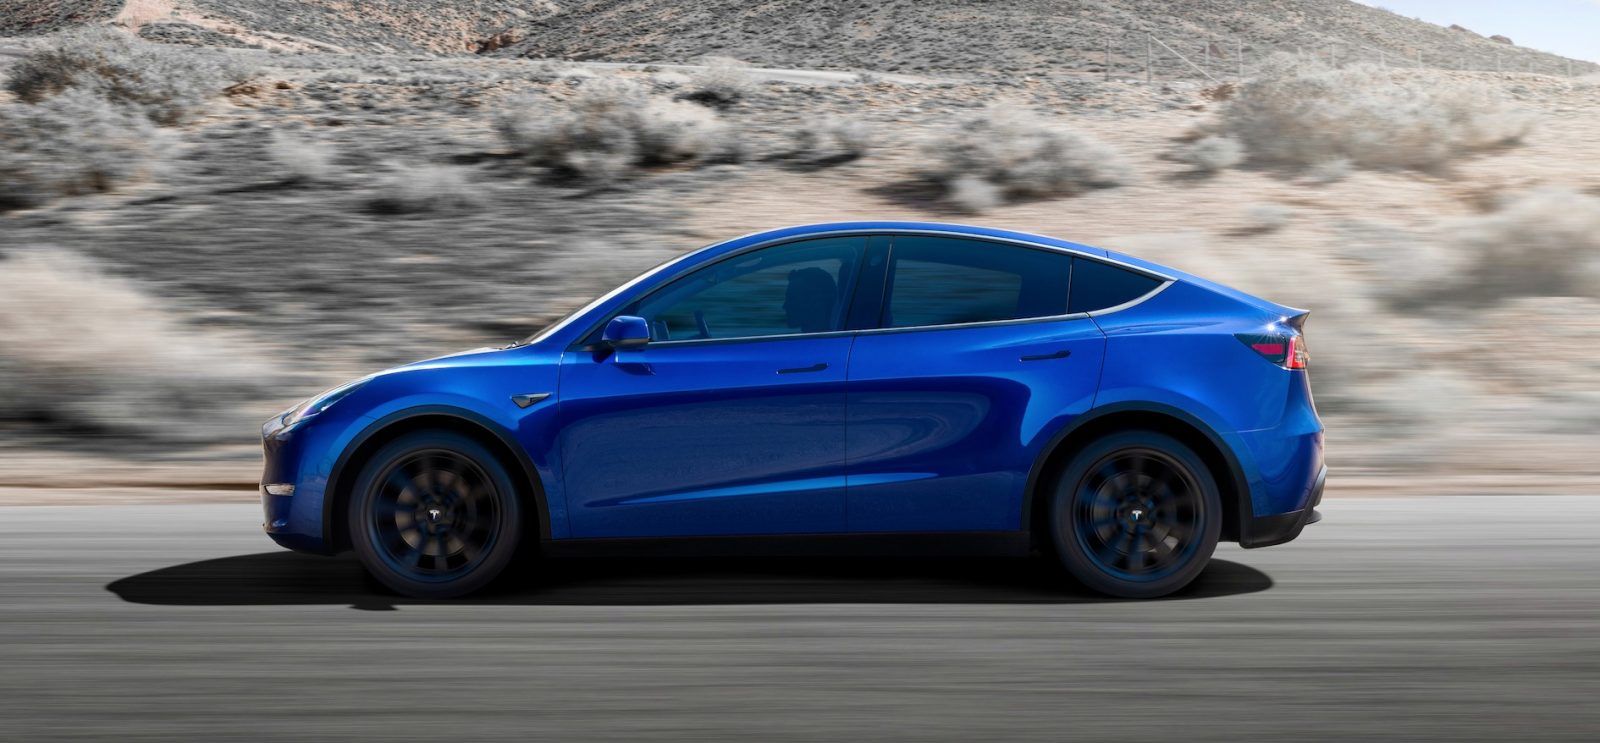 Tesla unveils Model Y electric SUV with 300 miles range and 7